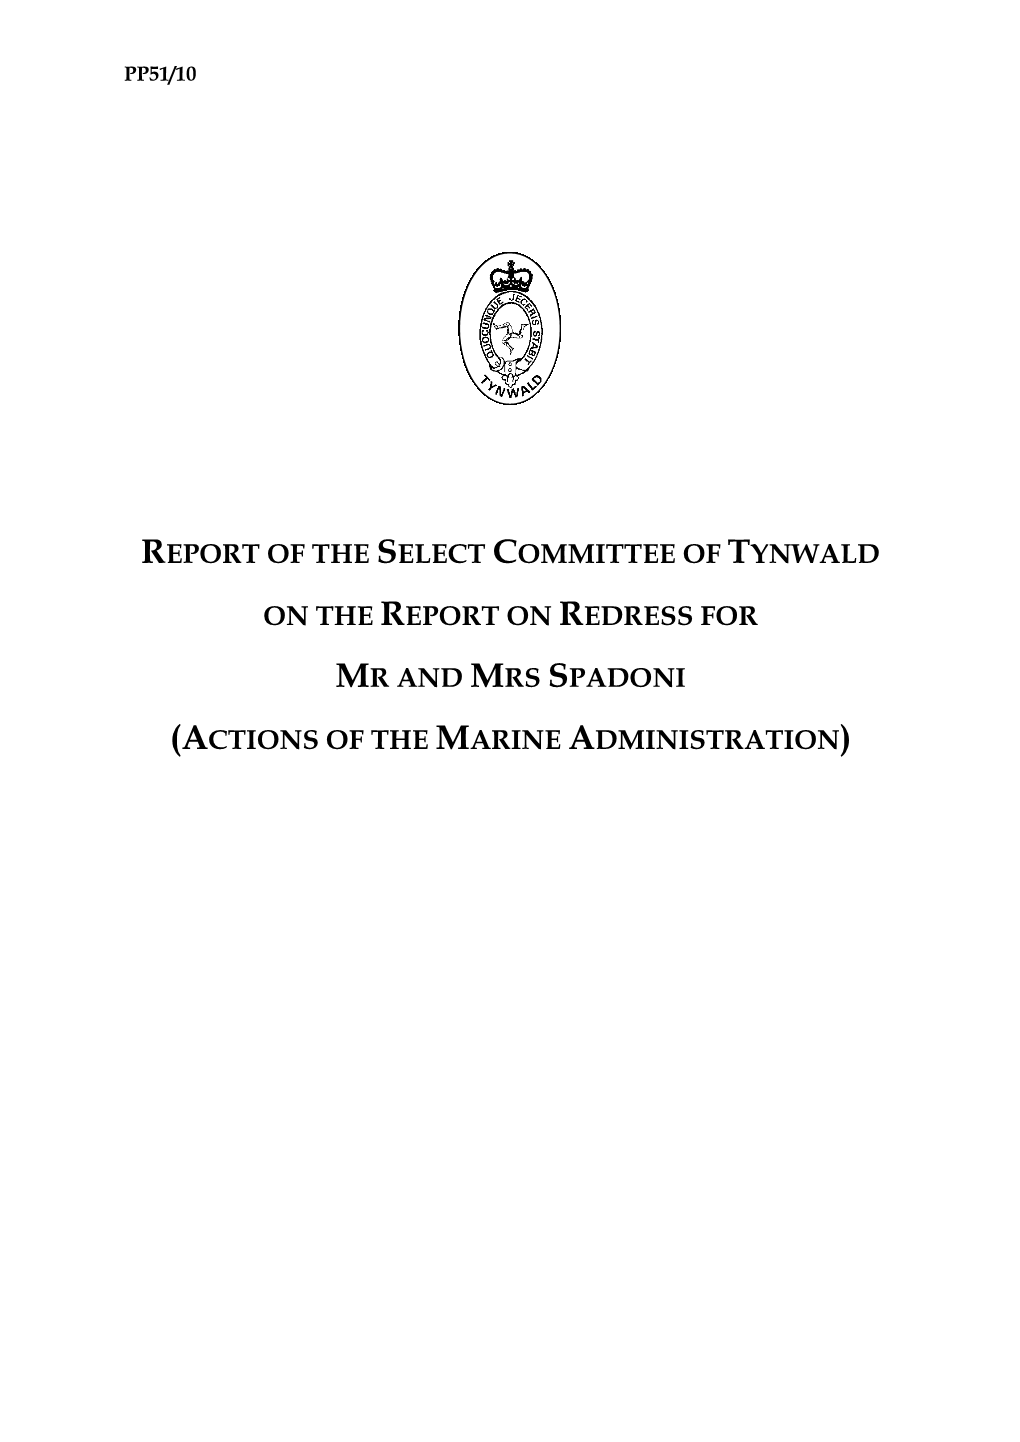 Report of Select Committee